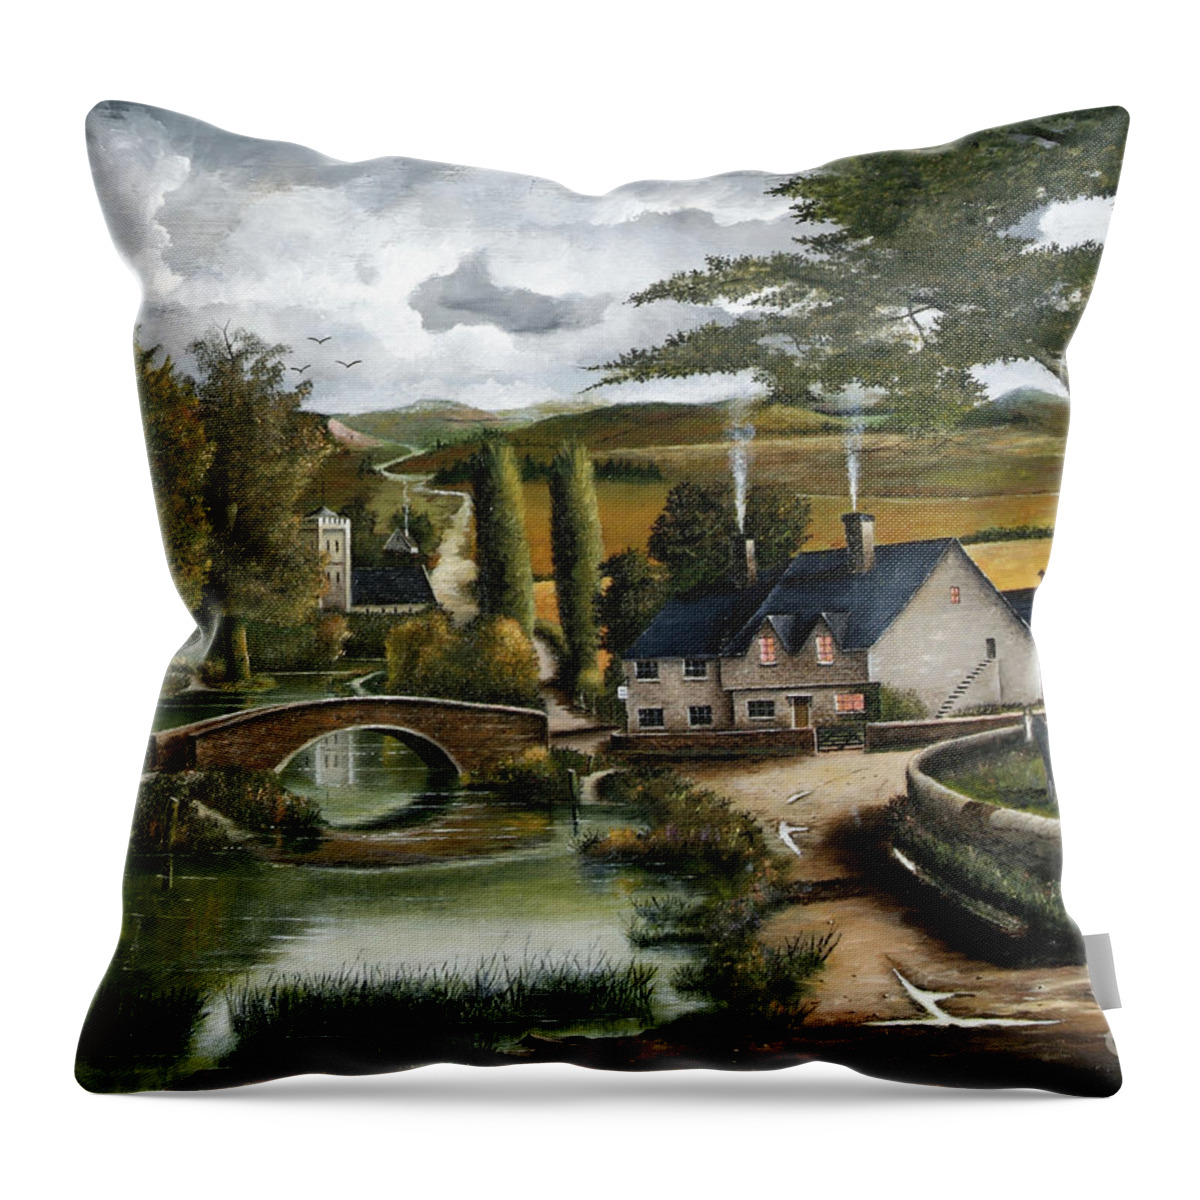 Countryside Throw Pillow featuring the painting Home Farm - Old England by Ken Wood